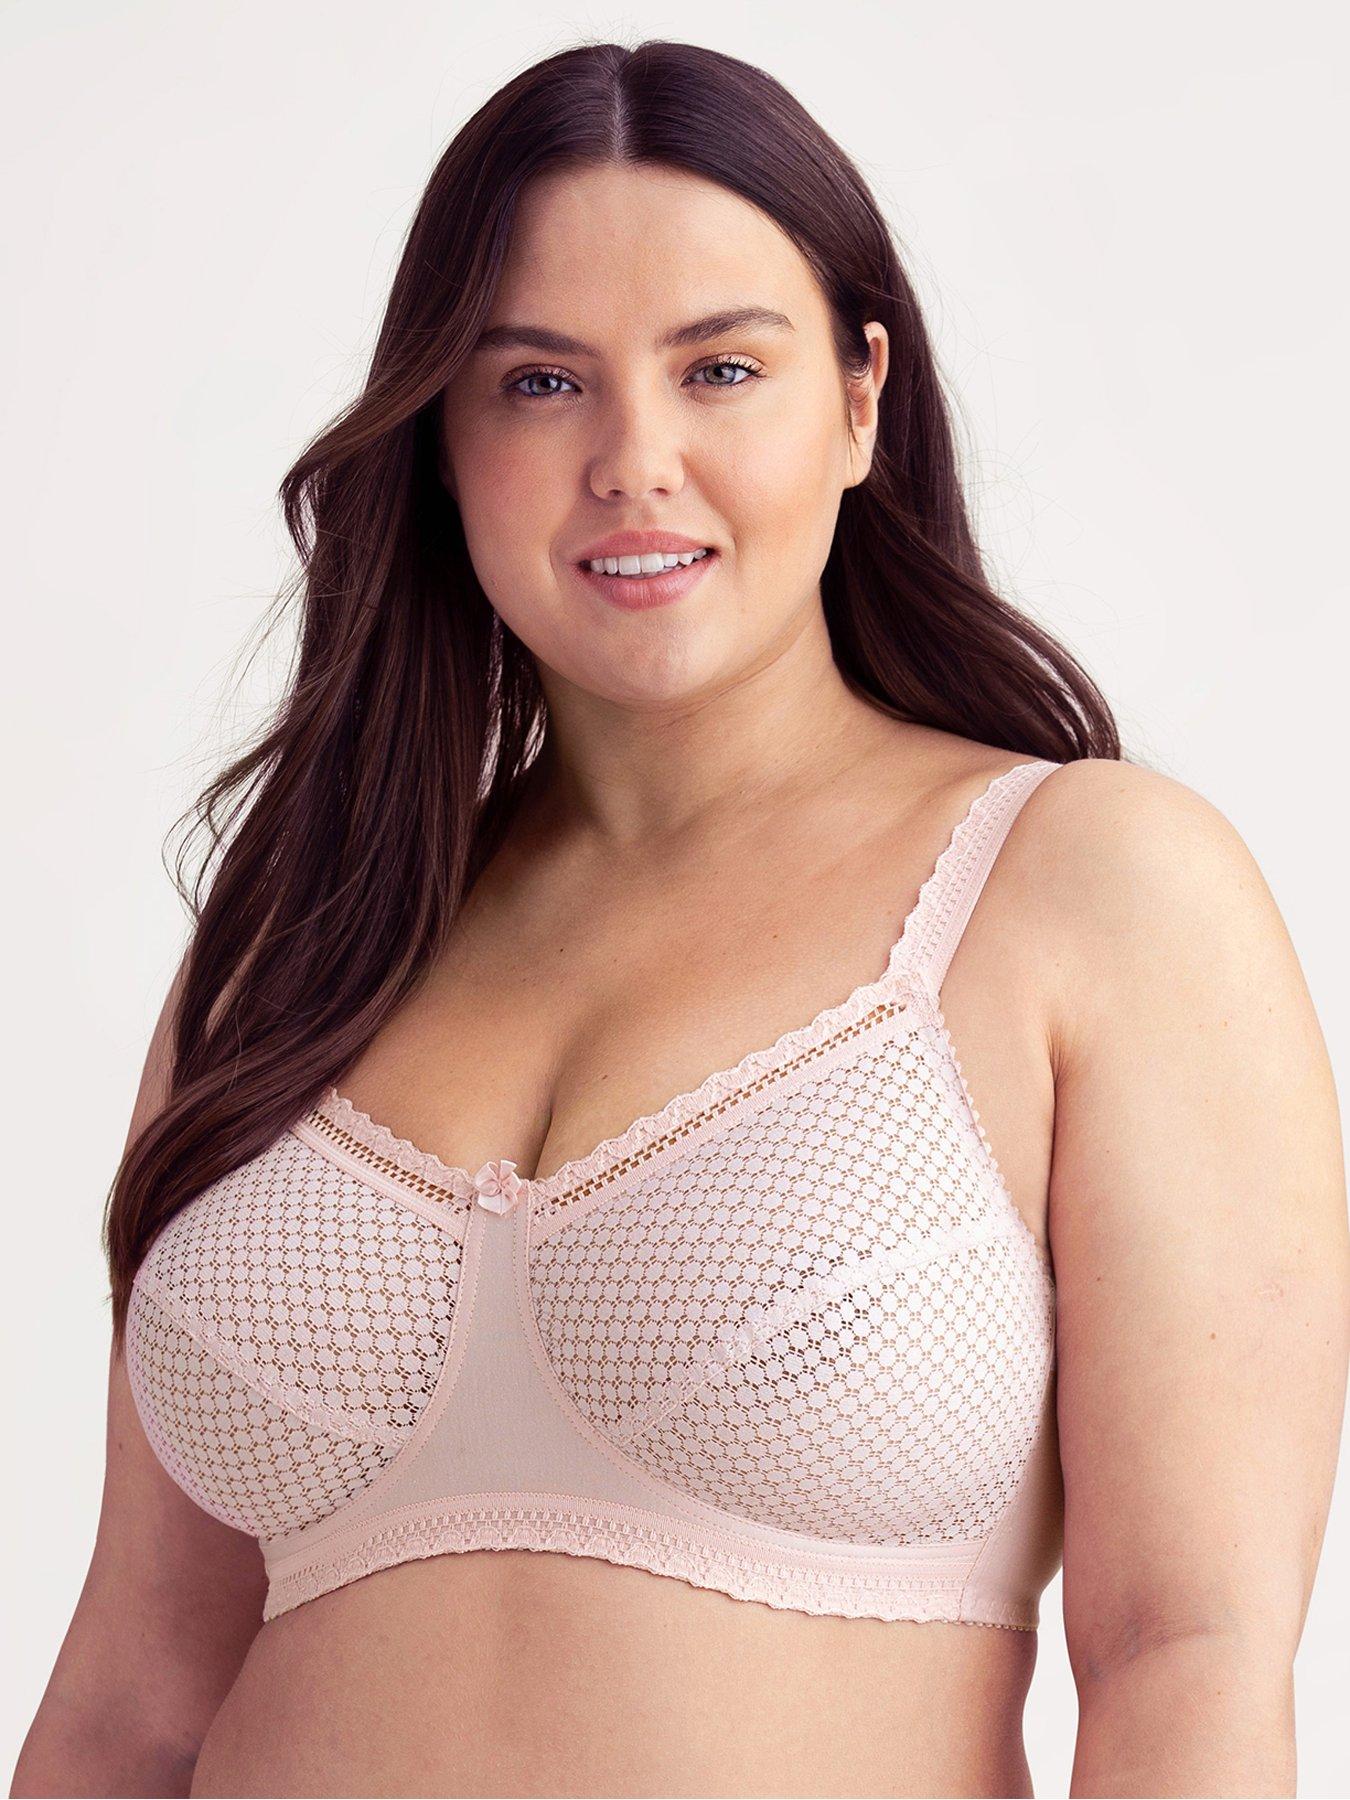 Ivory Rose Maternity Fuller Bust lace wired non-padded nursing bra